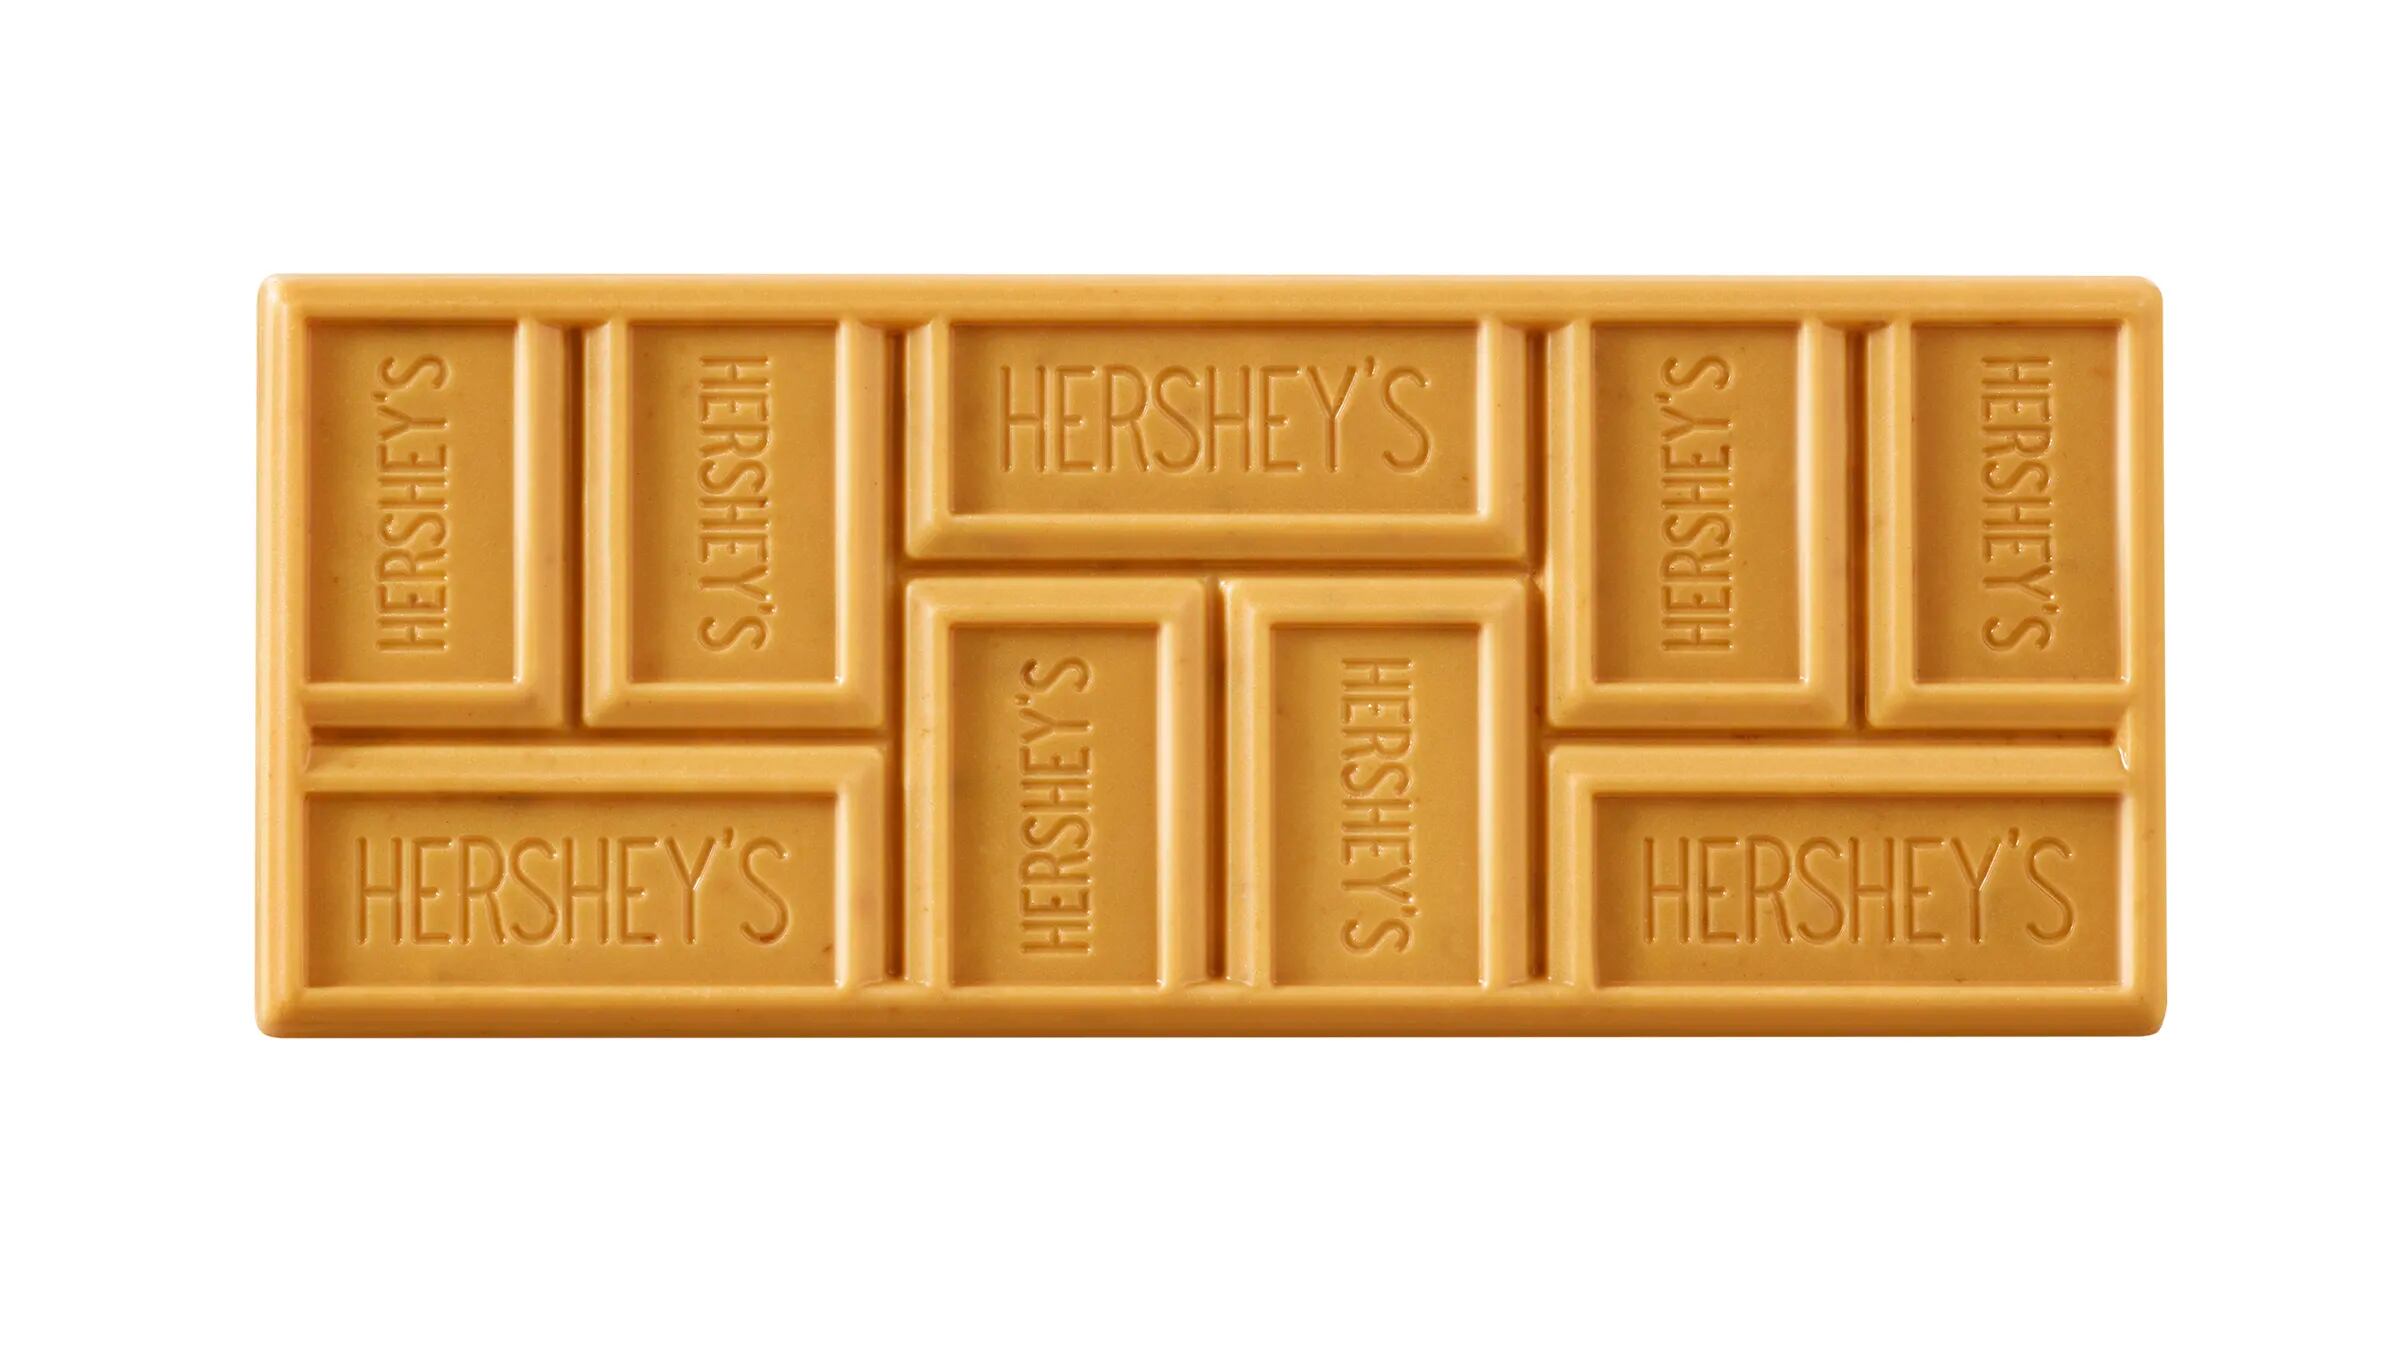 Hershey launches first new bar flavor since 1995